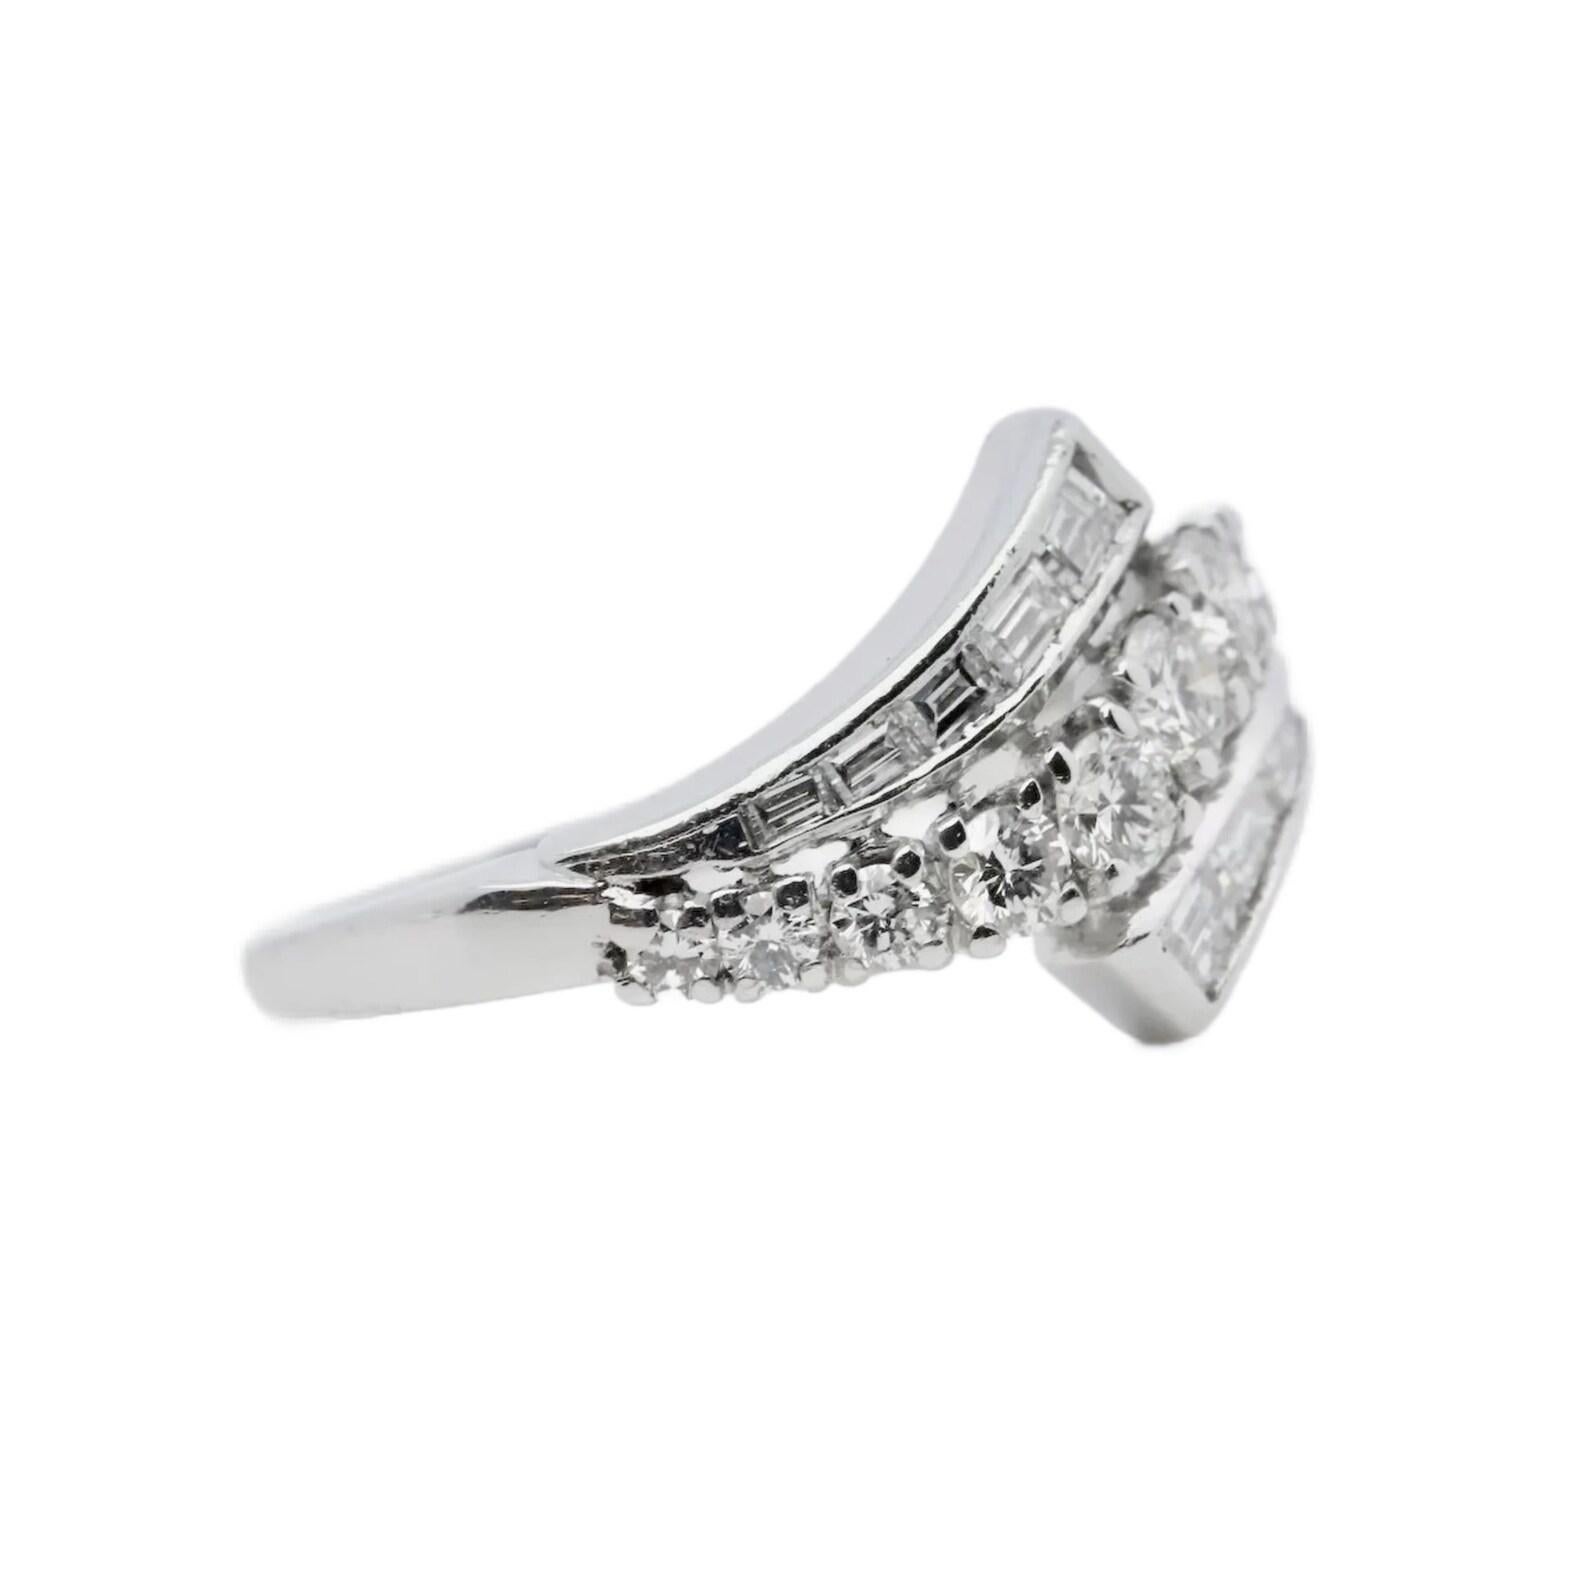 A hand crafted mid century diamond bypass ring in platinum. Featuring ten baguette cut and eleven round brilliant cut diamonds. The diamonds grade as E/F color, and VS1 clarity with a combined weight of 0.85 carats.

In excellent condition, this